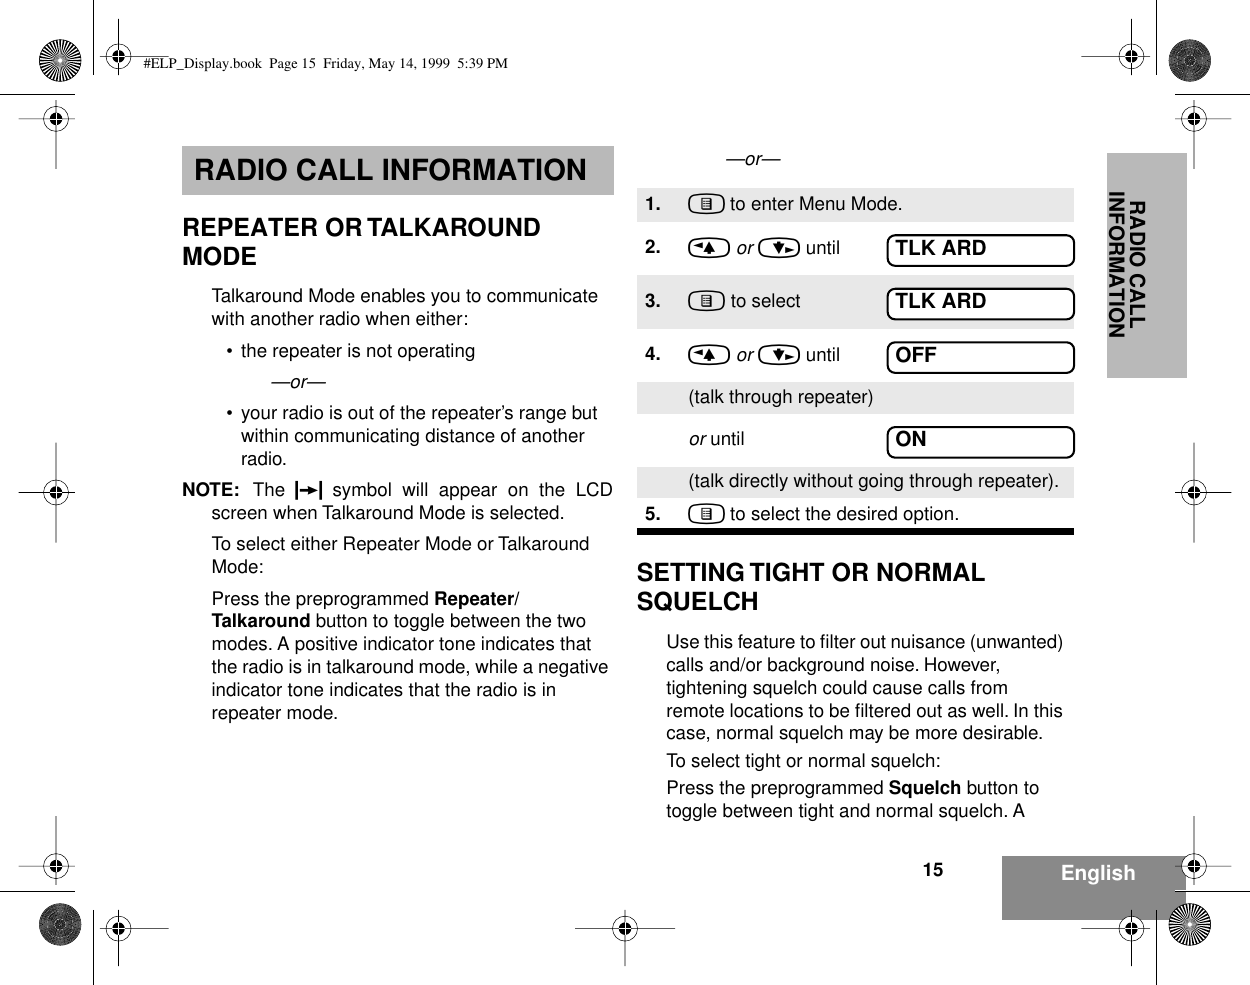  RADIO CALL INFORMATION 15 English RADIO CALL INFORMATION REPEATER OR TALKAROUND MODE Talkaround Mode enables you to communicate with another radio when either:• the repeater is not operating —or—• your radio is out of the repeater’s range but within communicating distance of another radio.NOTE: The  F symbol will appear on the LCDscreen when Talkaround Mode is selected.To select either Repeater Mode or Talkaround Mode:Press the preprogrammed Repeater/Talkaround button to toggle between the two modes. A positive indicator tone indicates that the radio is in talkaround mode, while a negative indicator tone indicates that the radio is in repeater mode.—or—SETTING TIGHT OR NORMAL SQUELCHUse this feature to ﬁlter out nuisance (unwanted) calls and/or background noise. However, tightening squelch could cause calls from remote locations to be ﬁltered out as well. In this case, normal squelch may be more desirable.To select tight or normal squelch:Press the preprogrammed Squelch button to toggle between tight and normal squelch. A 1. ) to enter Menu Mode.2. &lt; or &gt; until3. ) to select4. &lt; or &gt; until(talk through repeater)or until(talk directly without going through repeater).5. ) to select the desired option.TLK ARDTLK ARDOFFON#ELP_Display.book  Page 15  Friday, May 14, 1999  5:39 PM